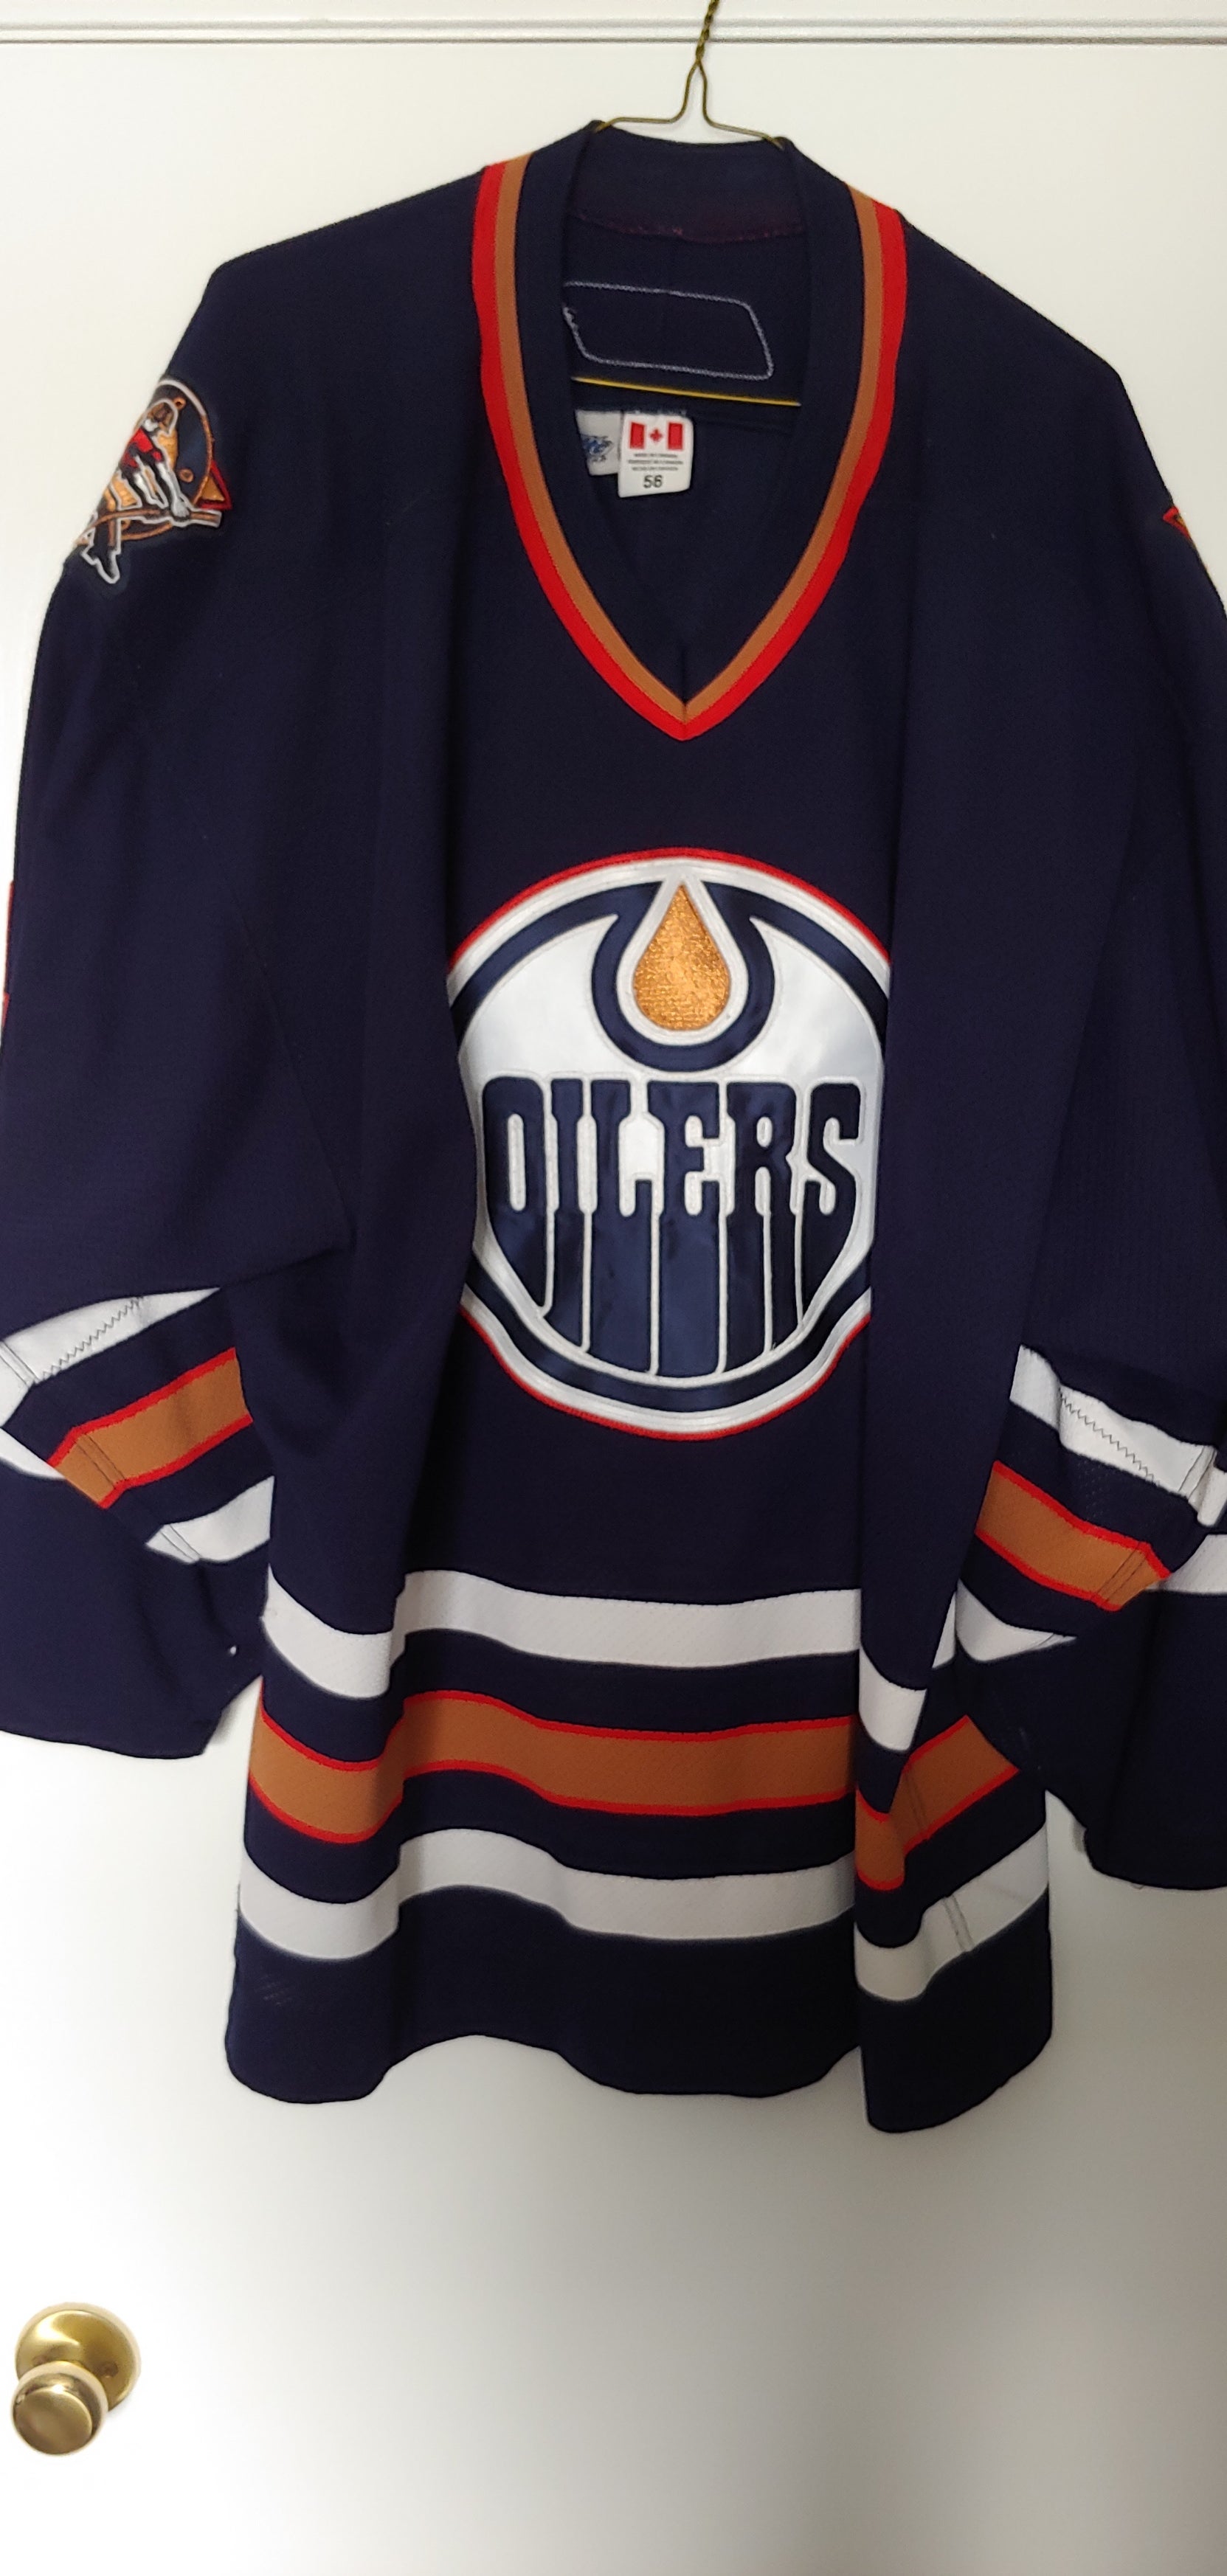 oilers jersey 2006